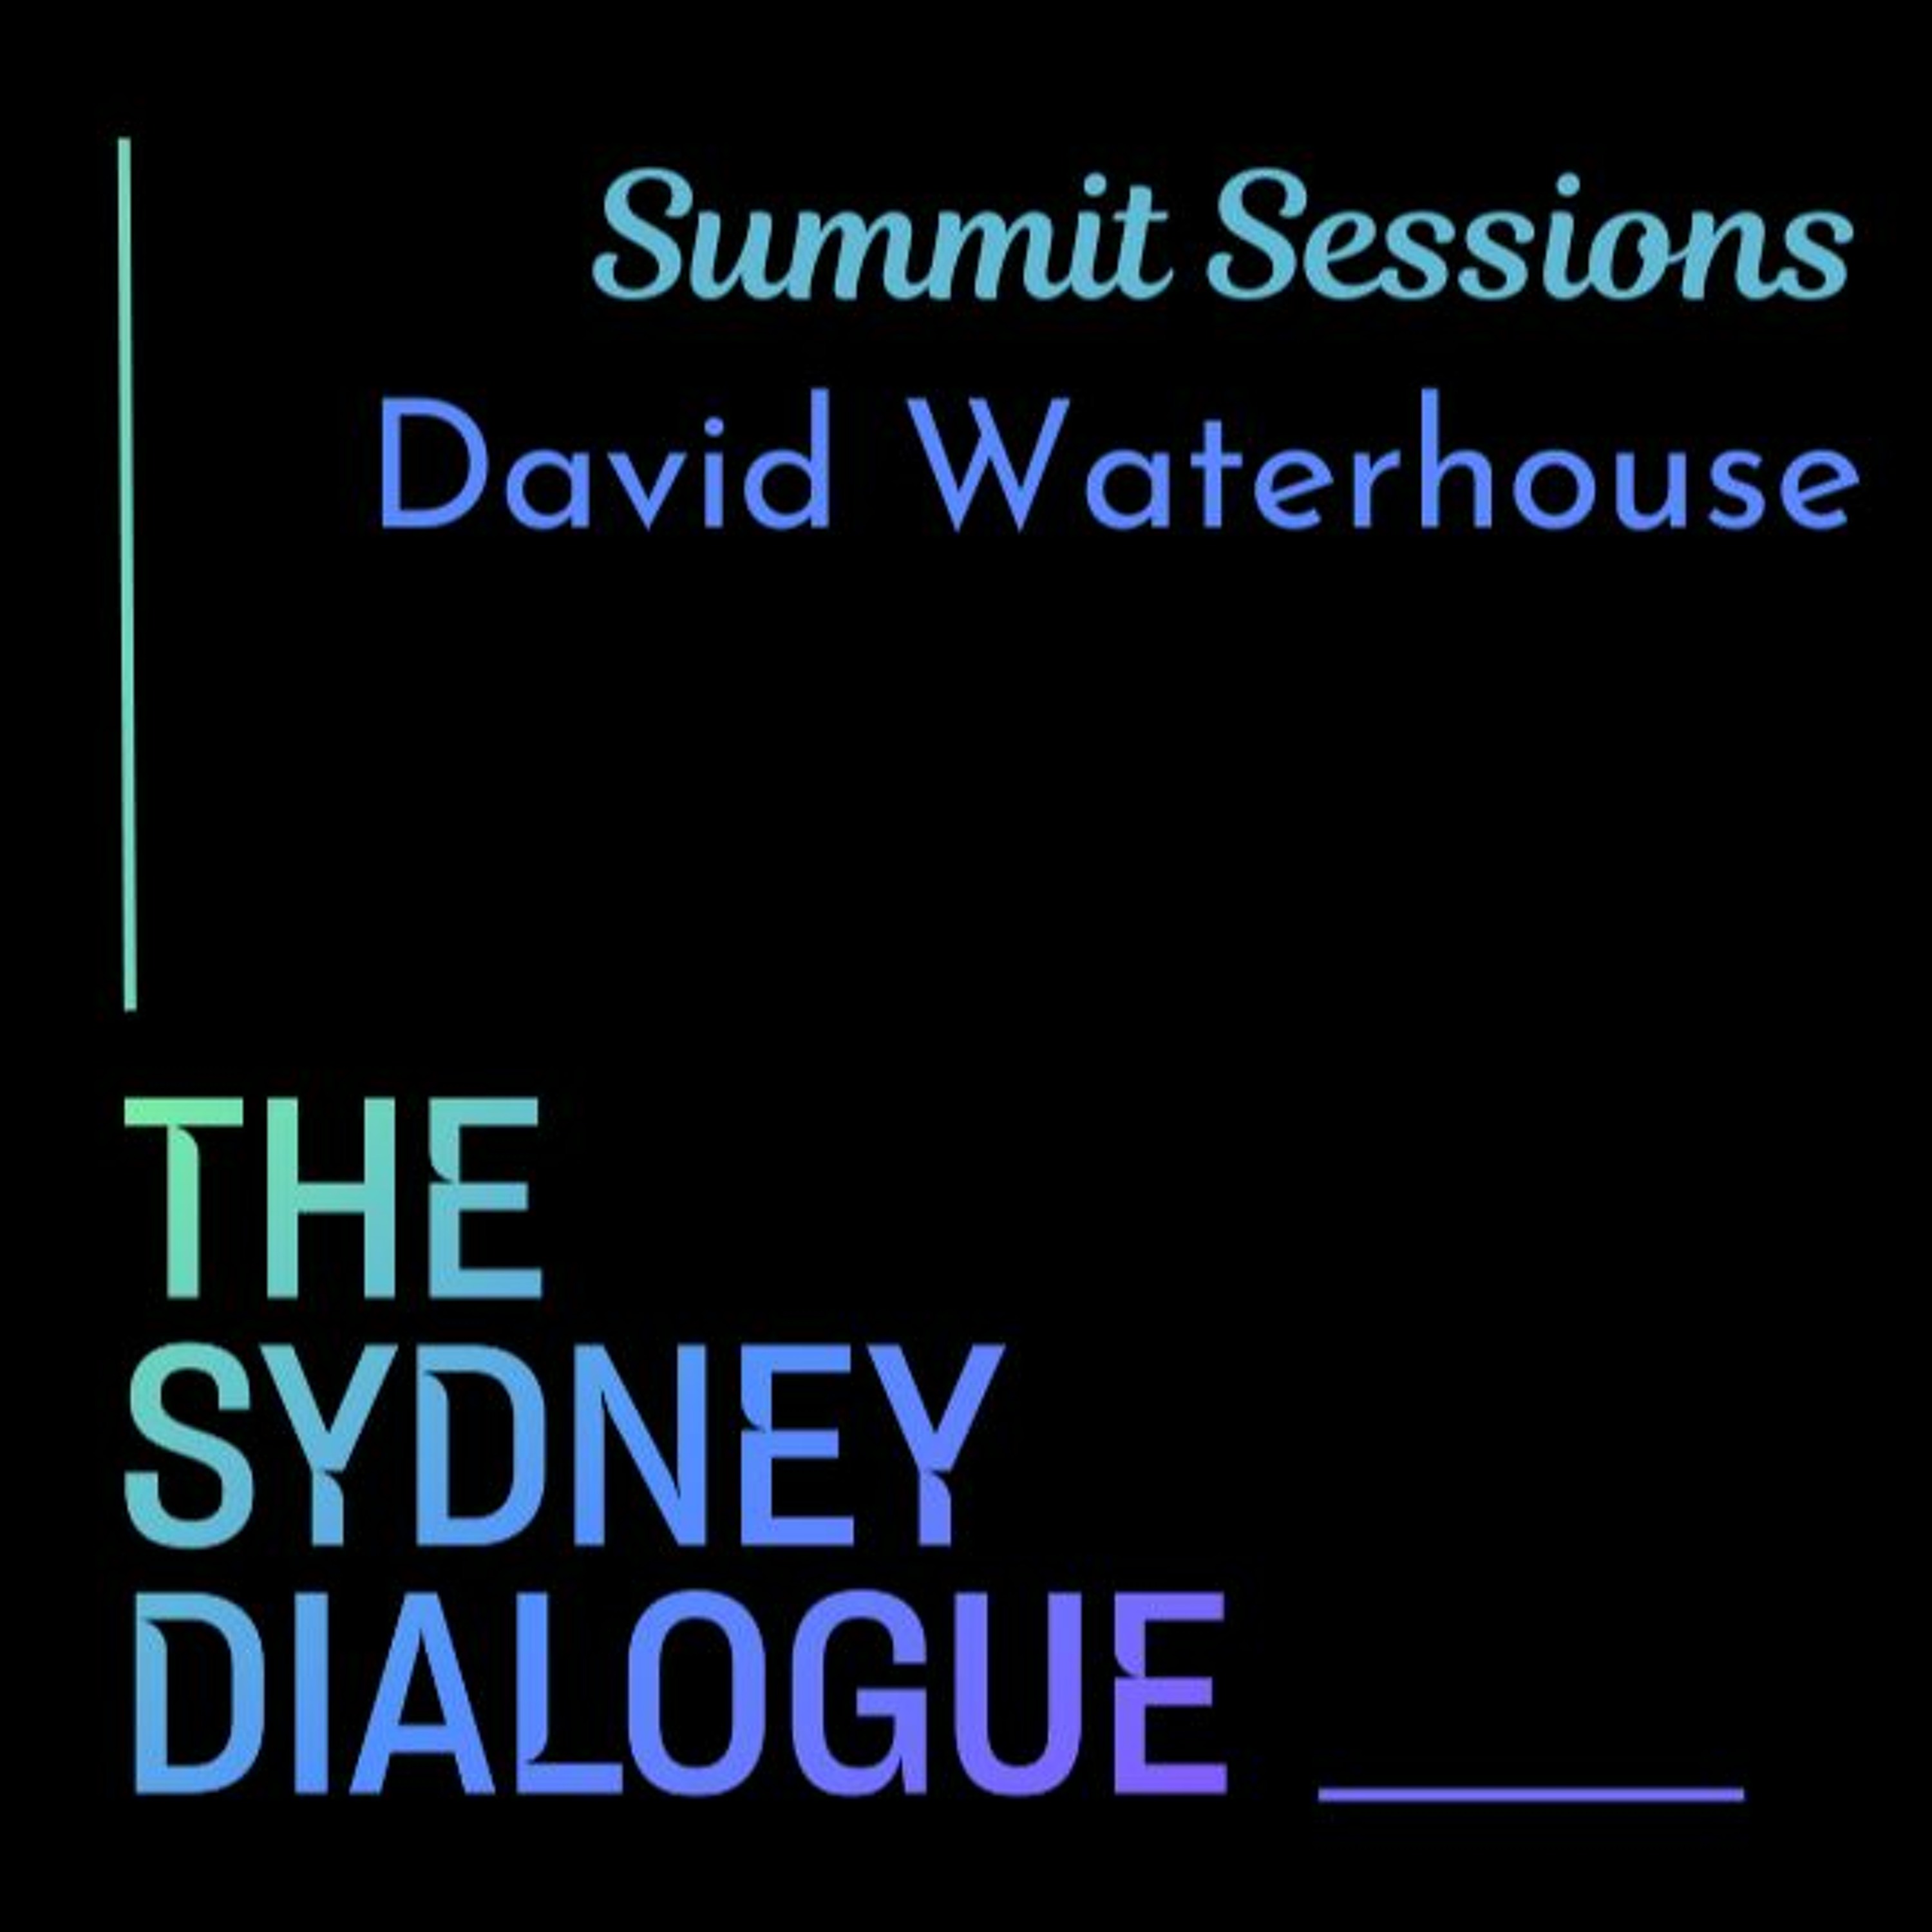 The Sydney Dialogue Summit Sessions: David Waterhouse